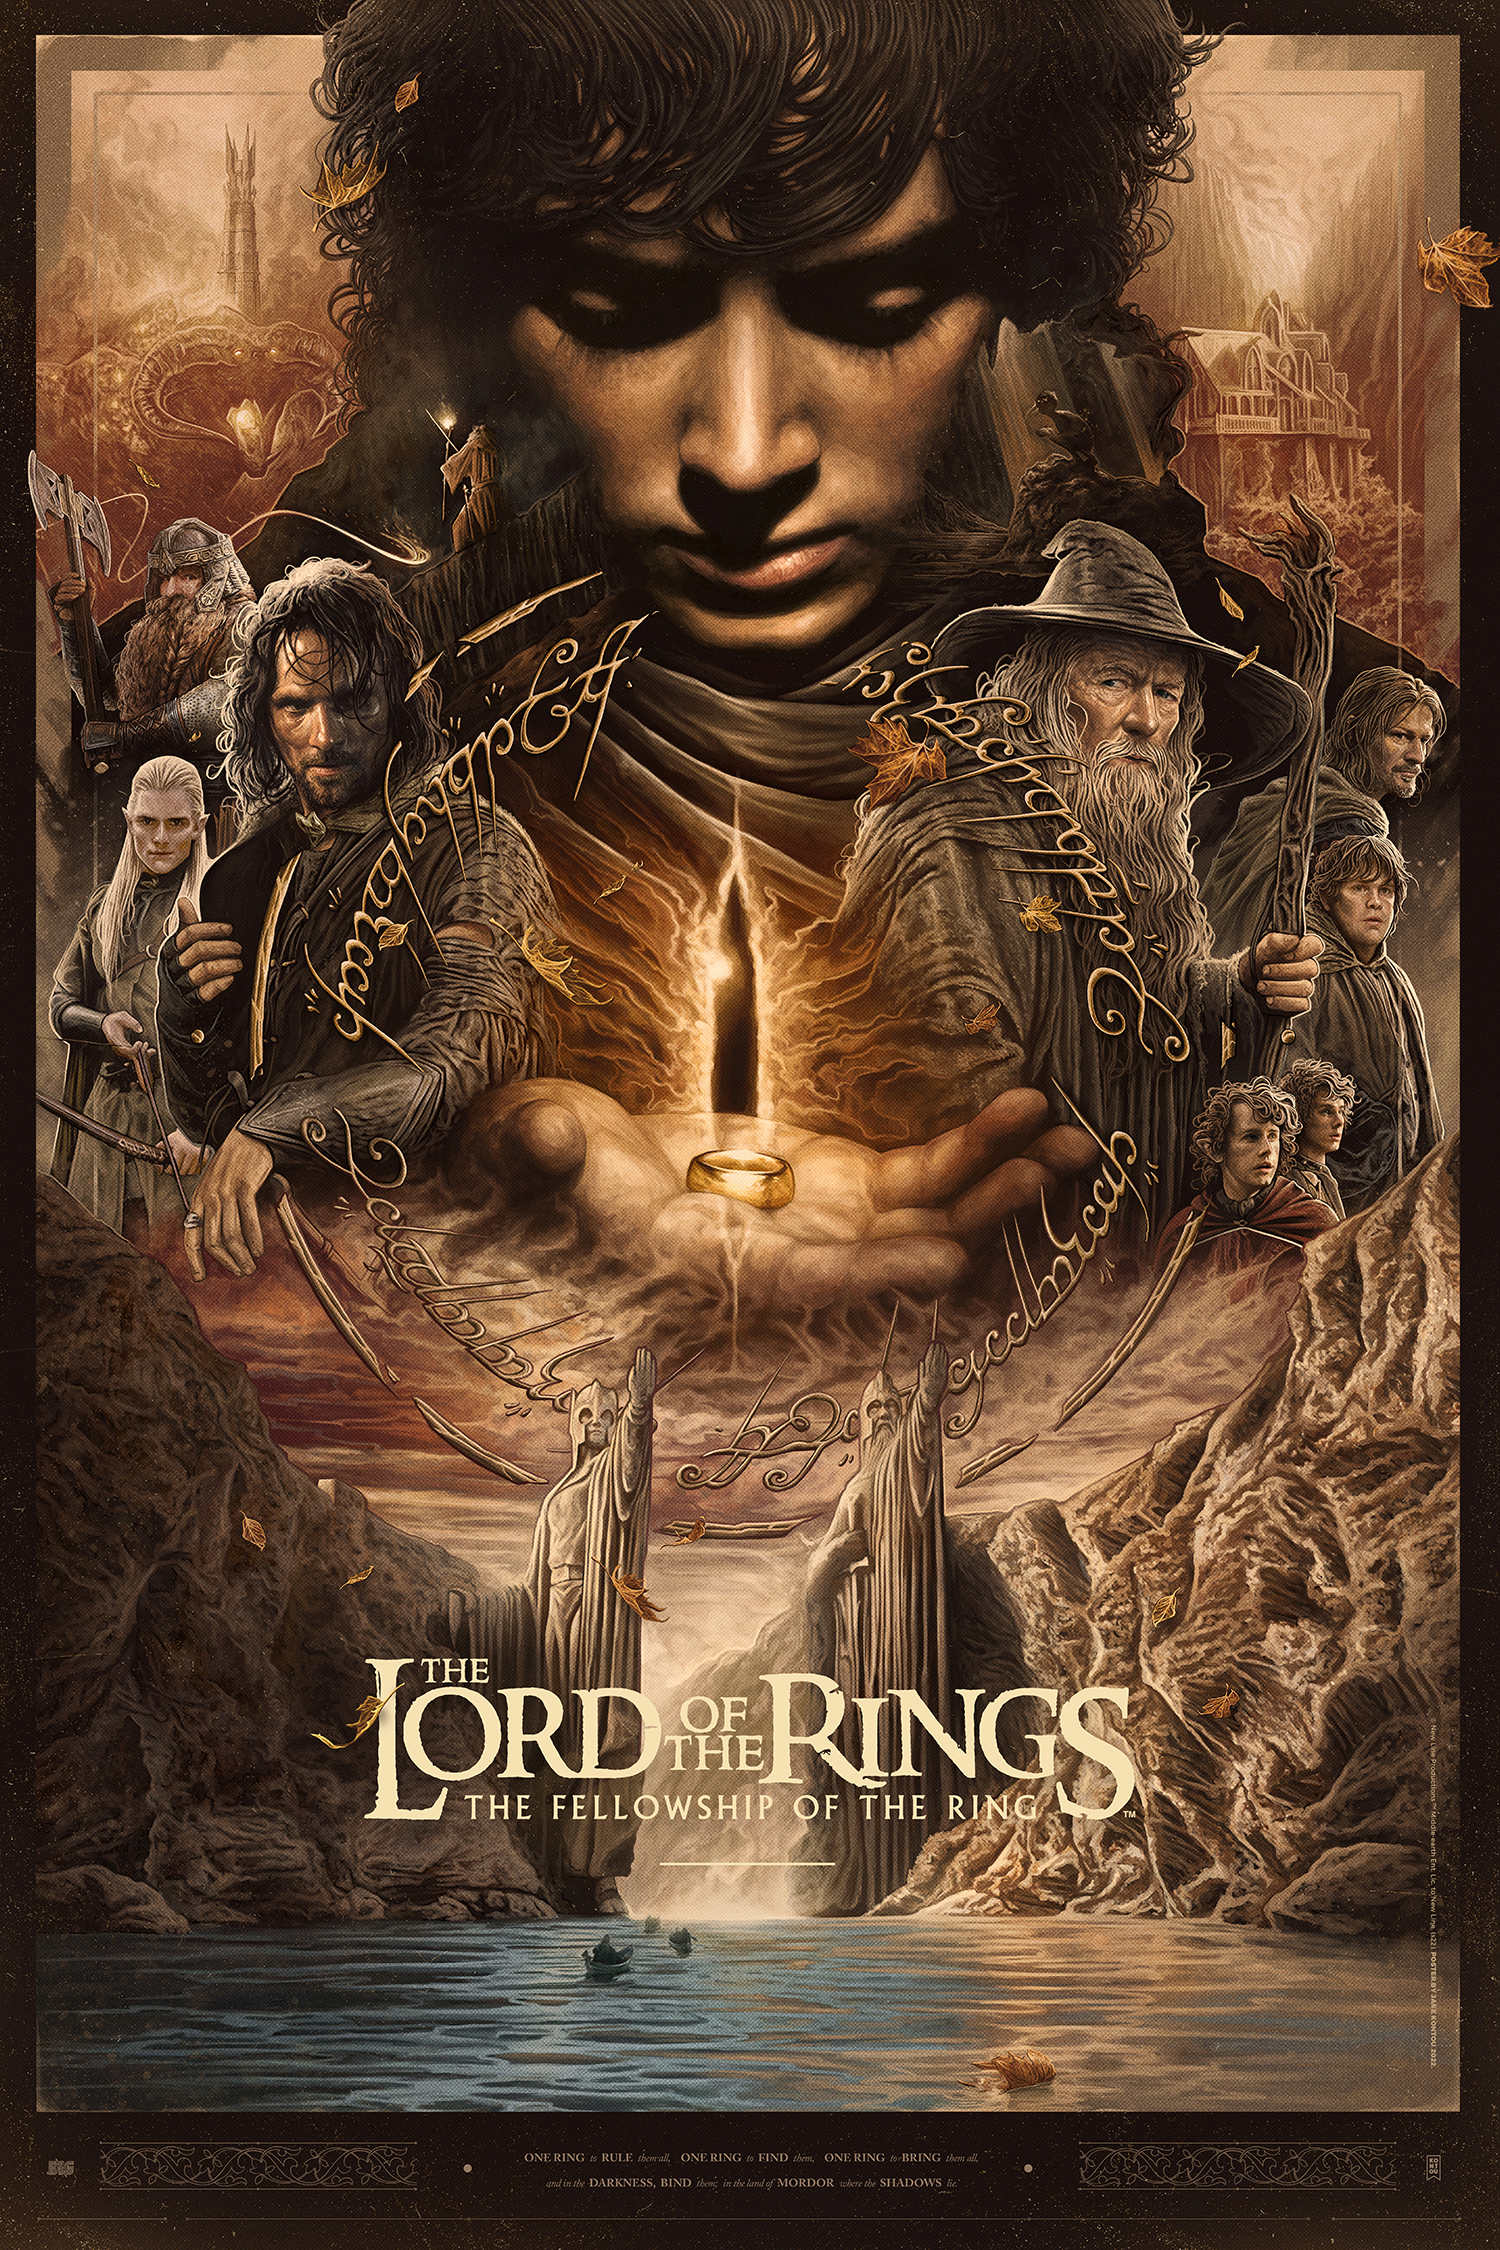 LOTR: THE FELLOWSHIP OF THE RING by Jake Kontou - On Sale INFO